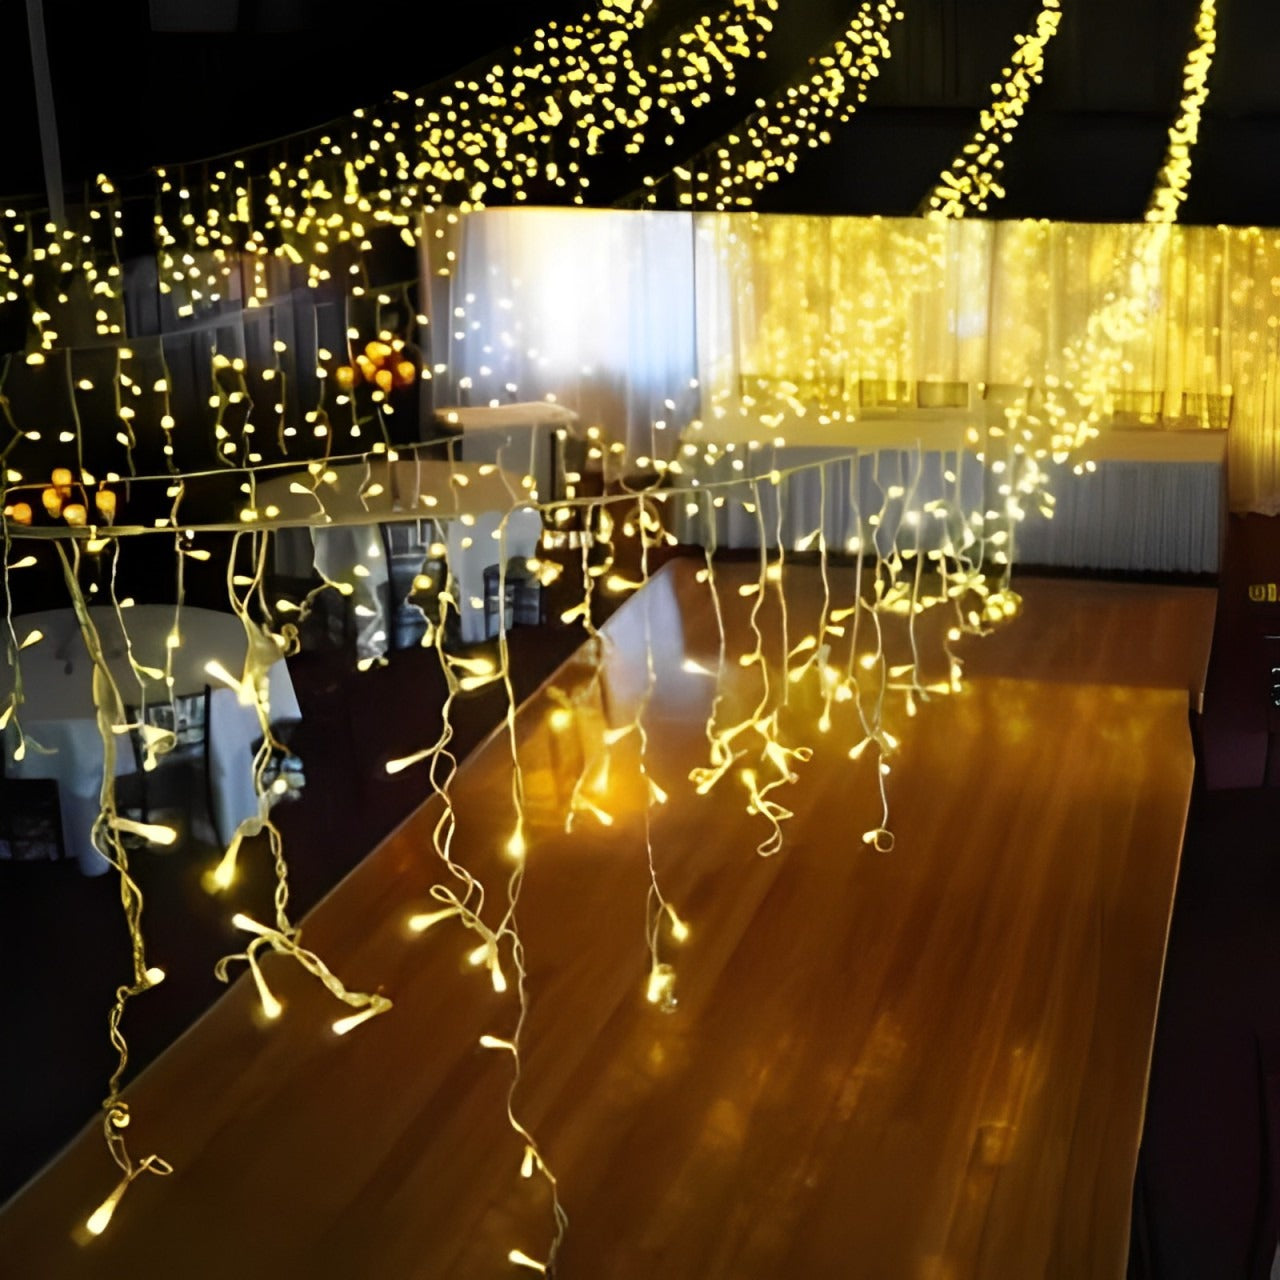 LED String Warm Light with 8 Lighting Modes - Fairy Waterfall Light for Parties, Indoor and Outdoor Decor, Festivities